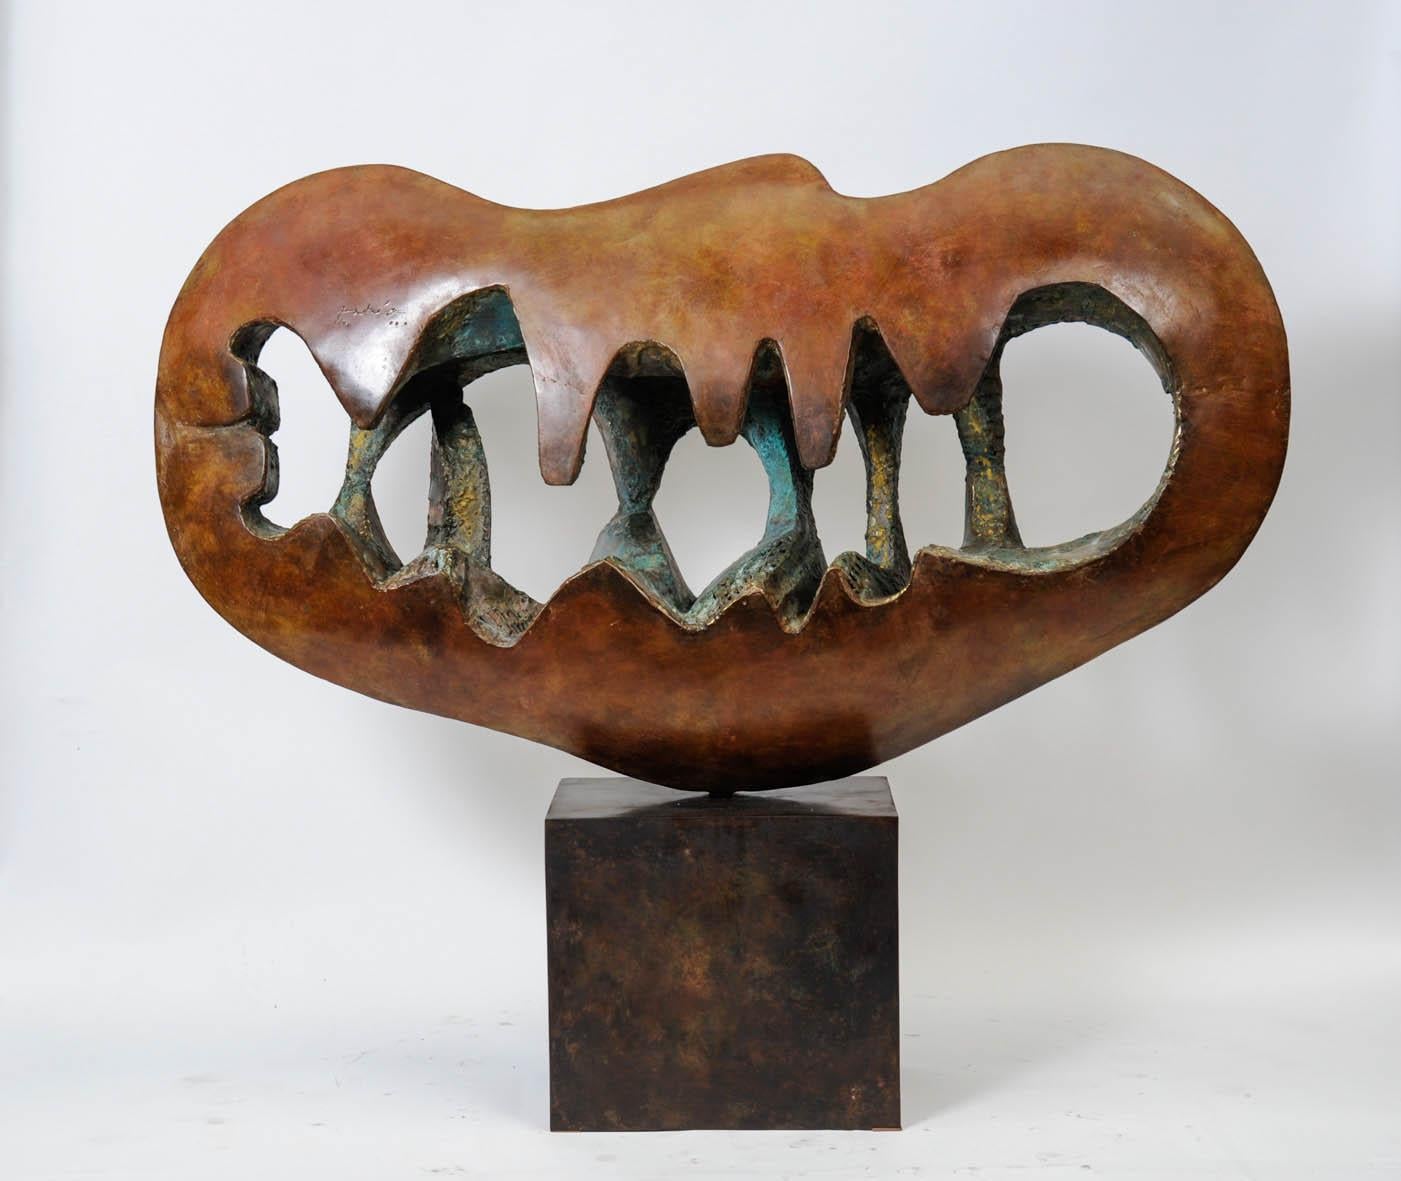 Important patinated bronze sculpture signed Andréou
Very nice piece with great patina
Dated 1983.